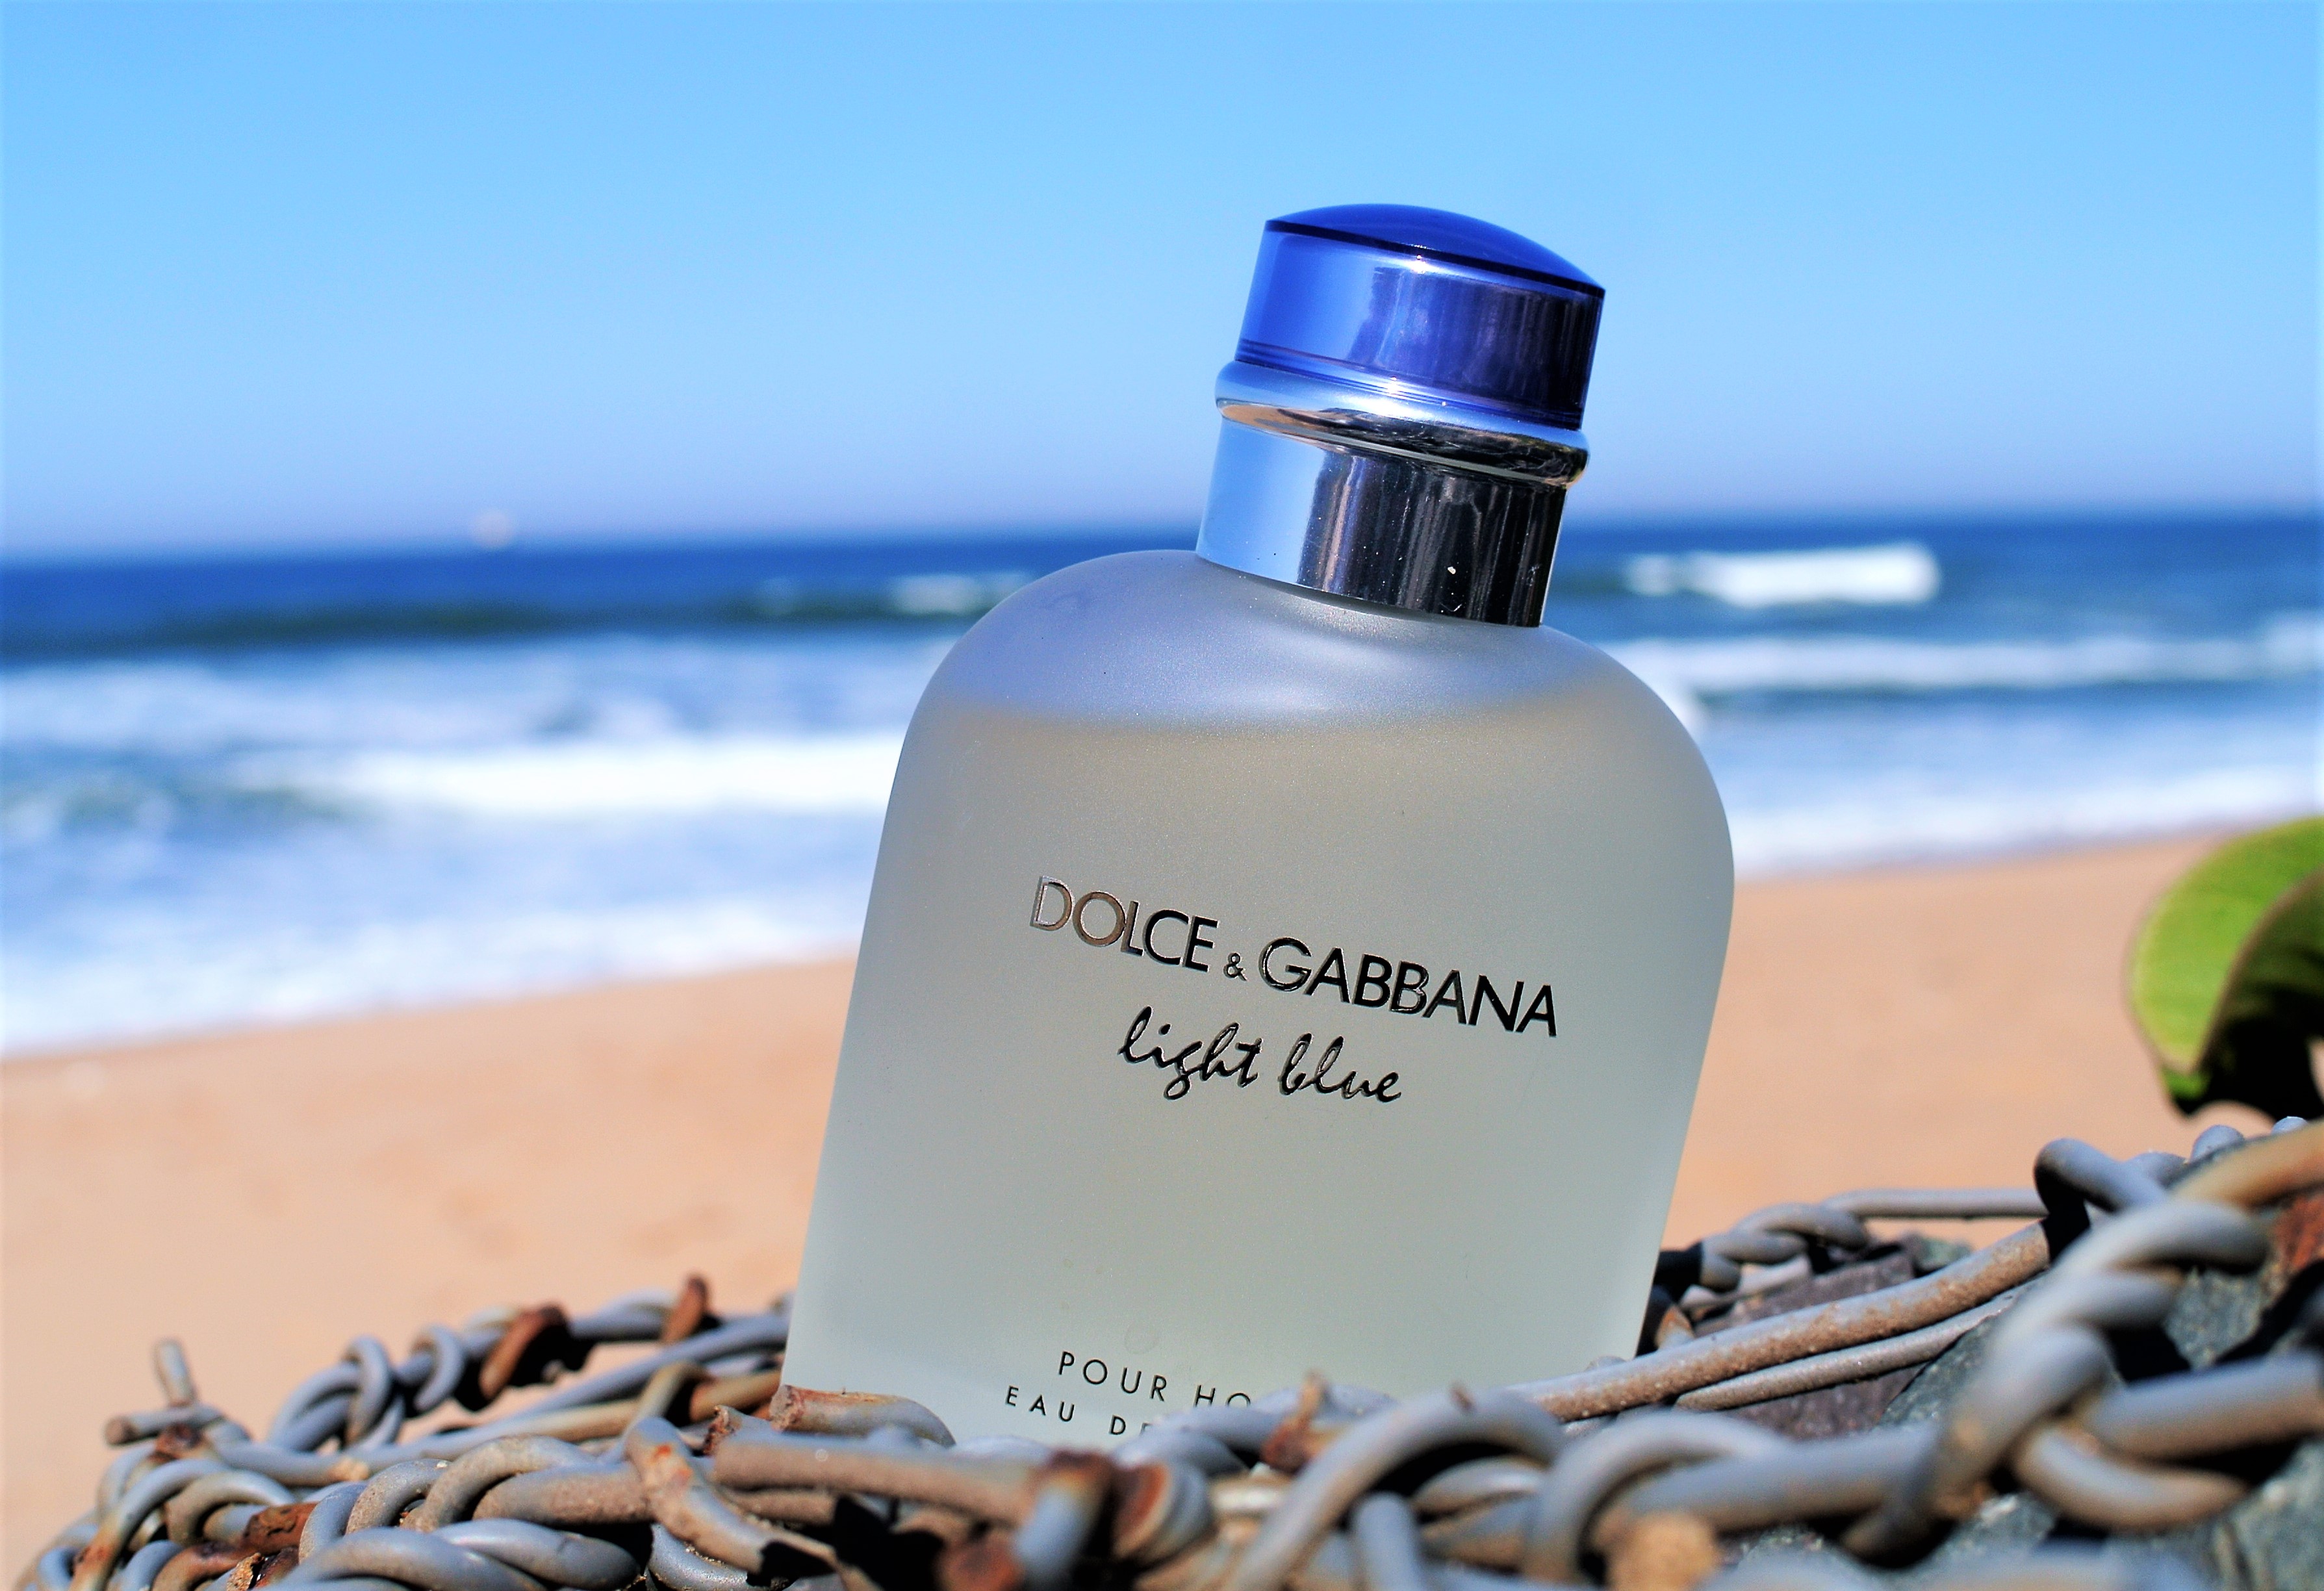 Dolce & Gabbana Light Blue And Dolce & Gabbana Pour Homme Reviews